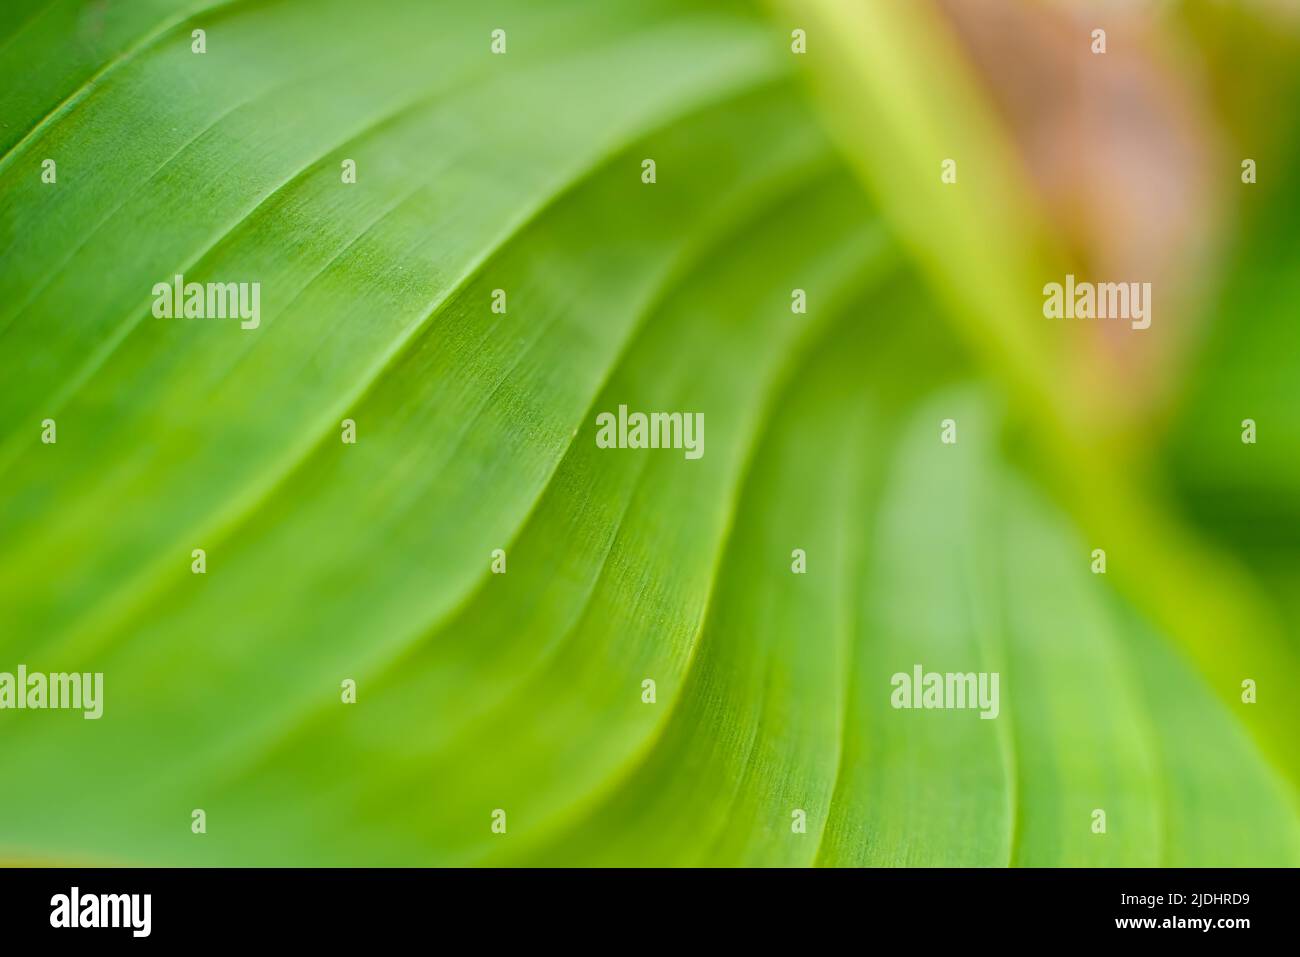 Natural background of flat texture of a wavy banana leaf. Stock Photo